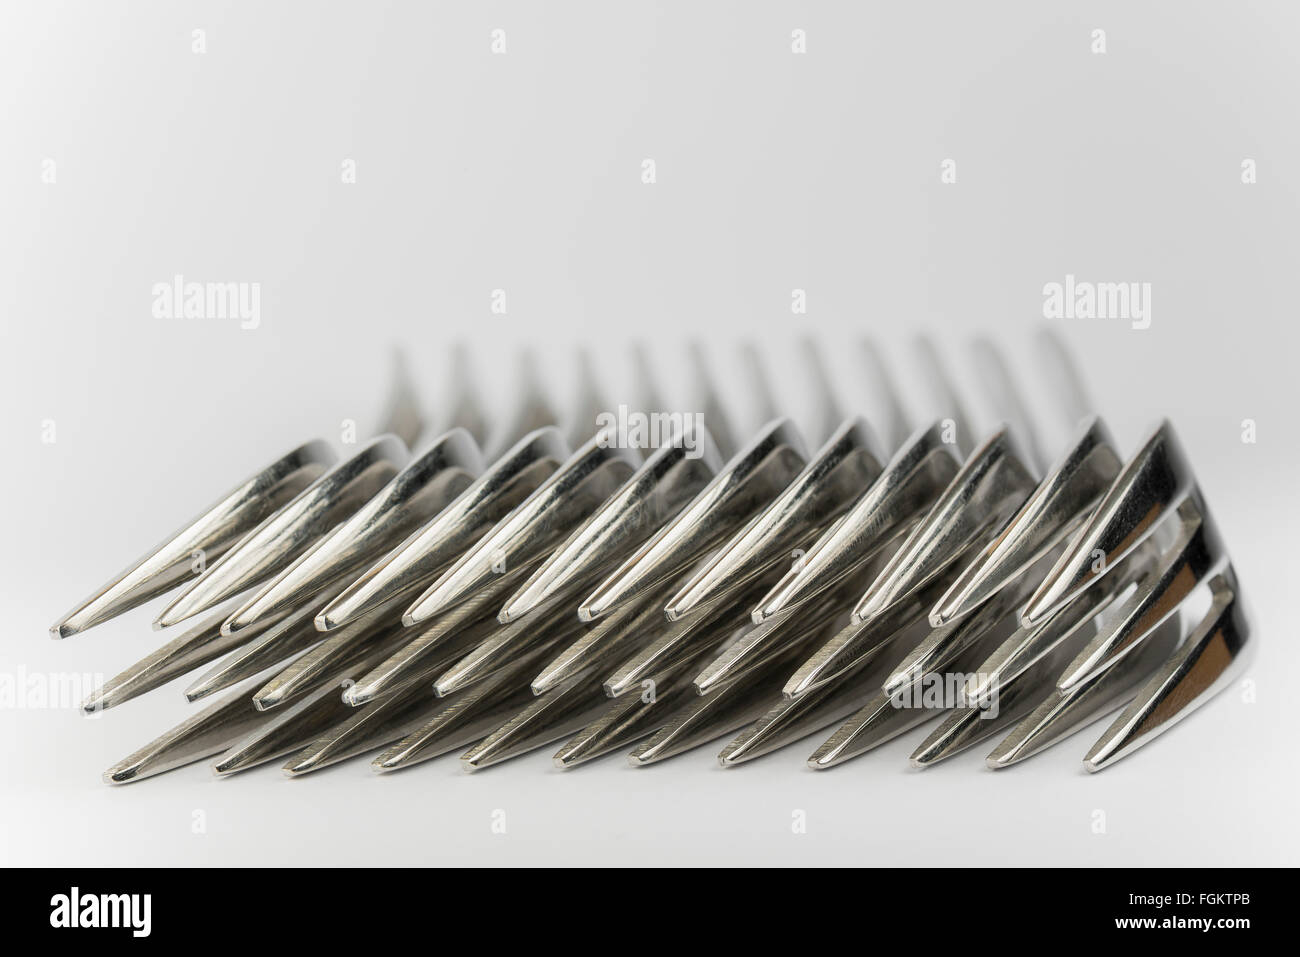 Abstract collection of metal forks Stock Photo